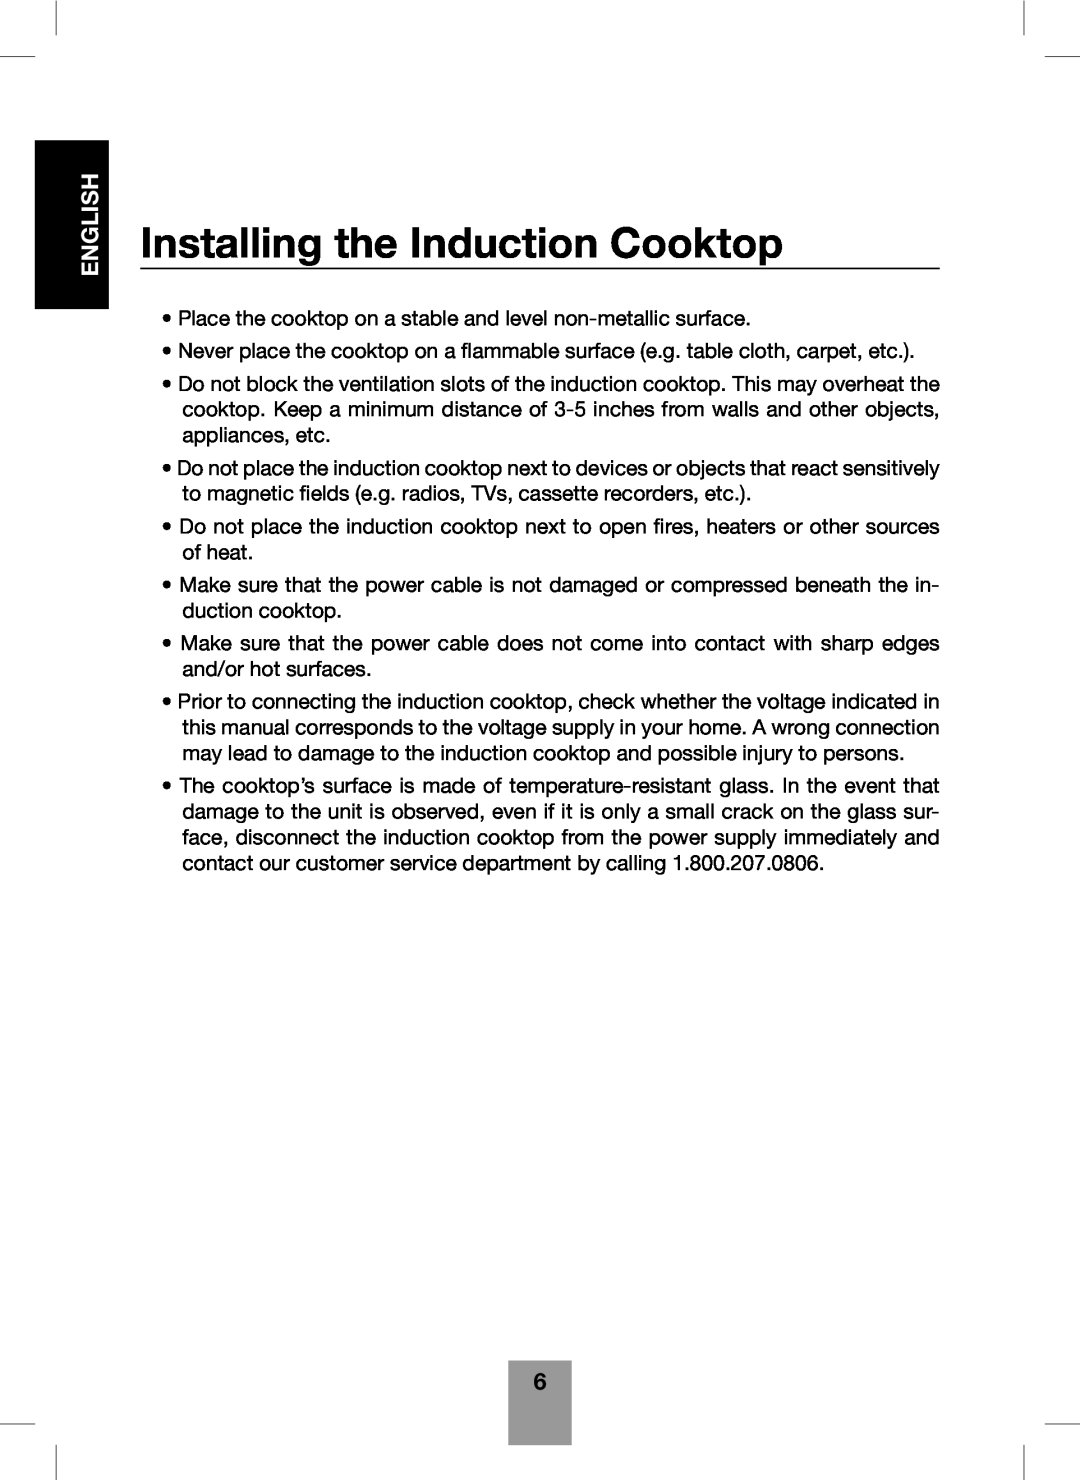 Fagor America Portable Induction Cooktop user manual Installing the Induction Cooktop, English 